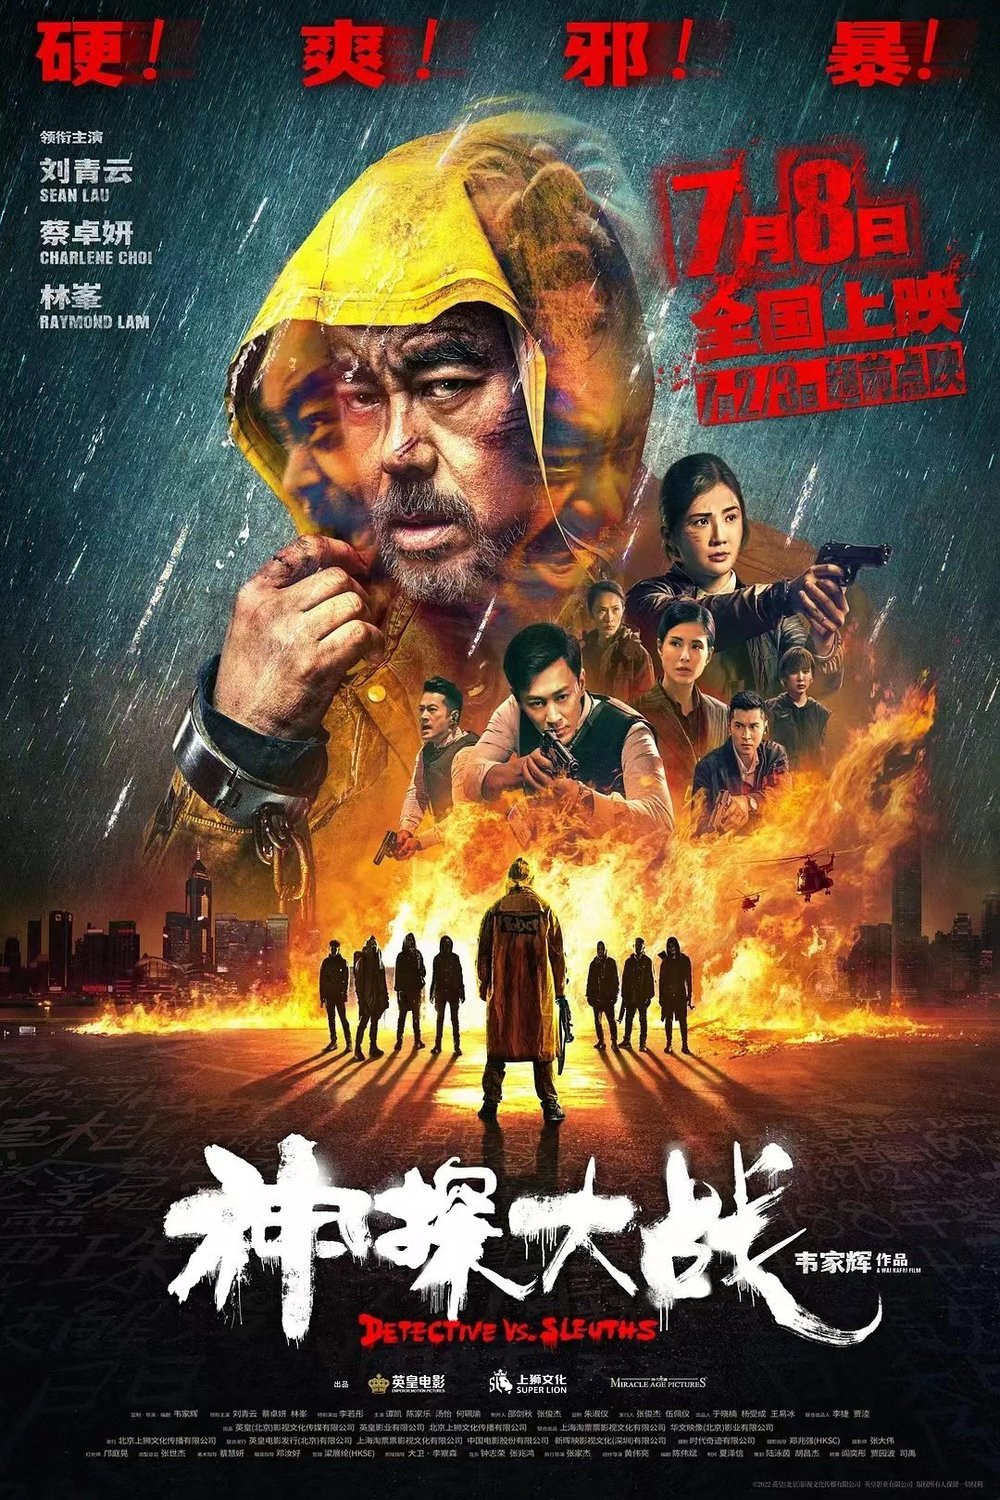 Cantonese poster of the movie San taam dai zin